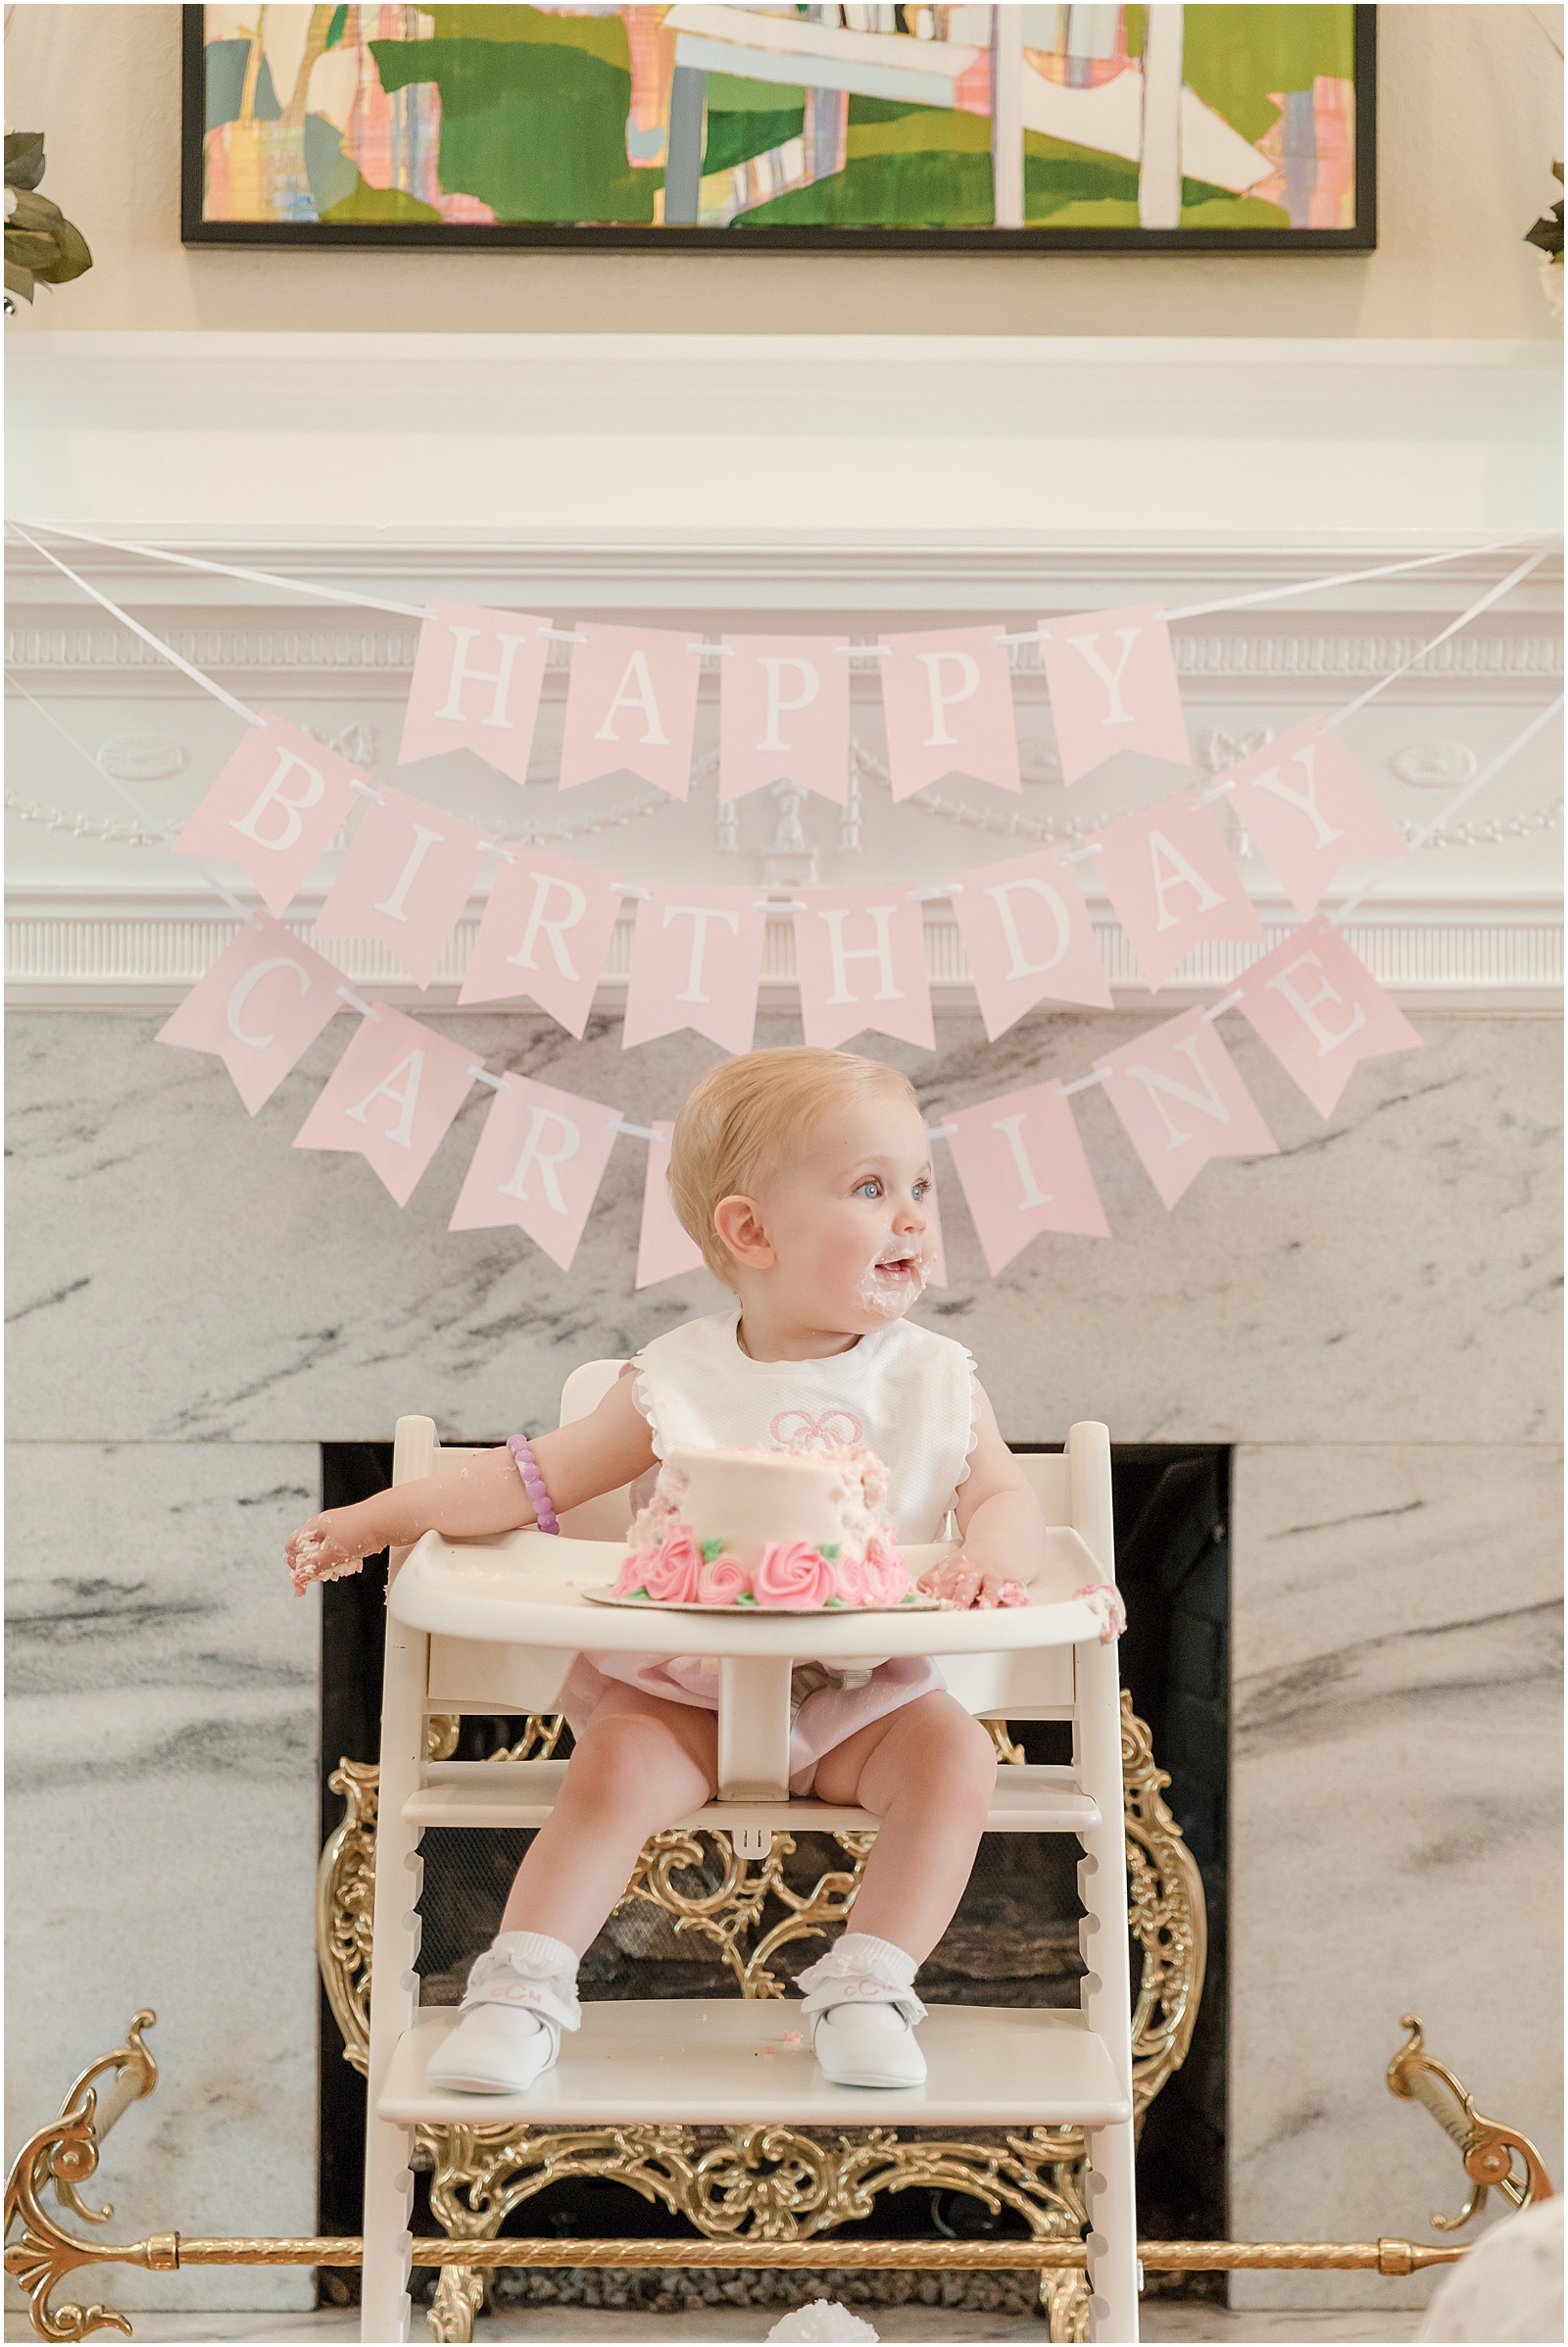 Greenville first birthday photos, Little Happies birthday banner, pink and white birthday party